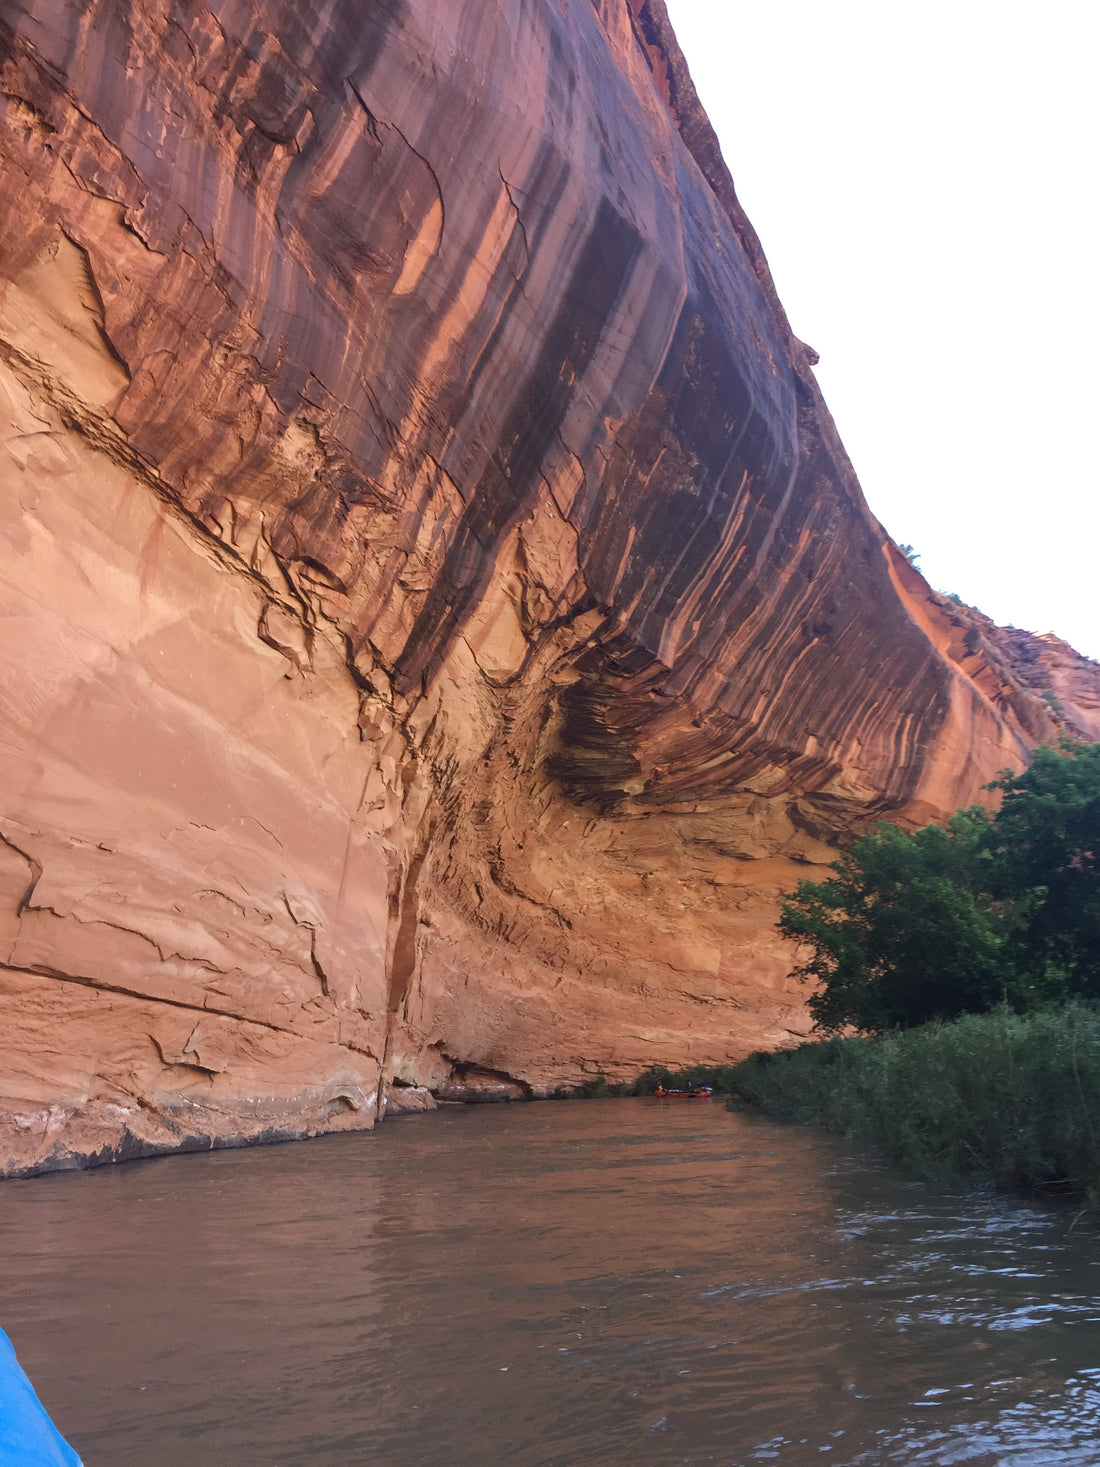 Trip Report- Dolores River from Gypsum Valley Boat Ramp to Bedrock Boat Ramp